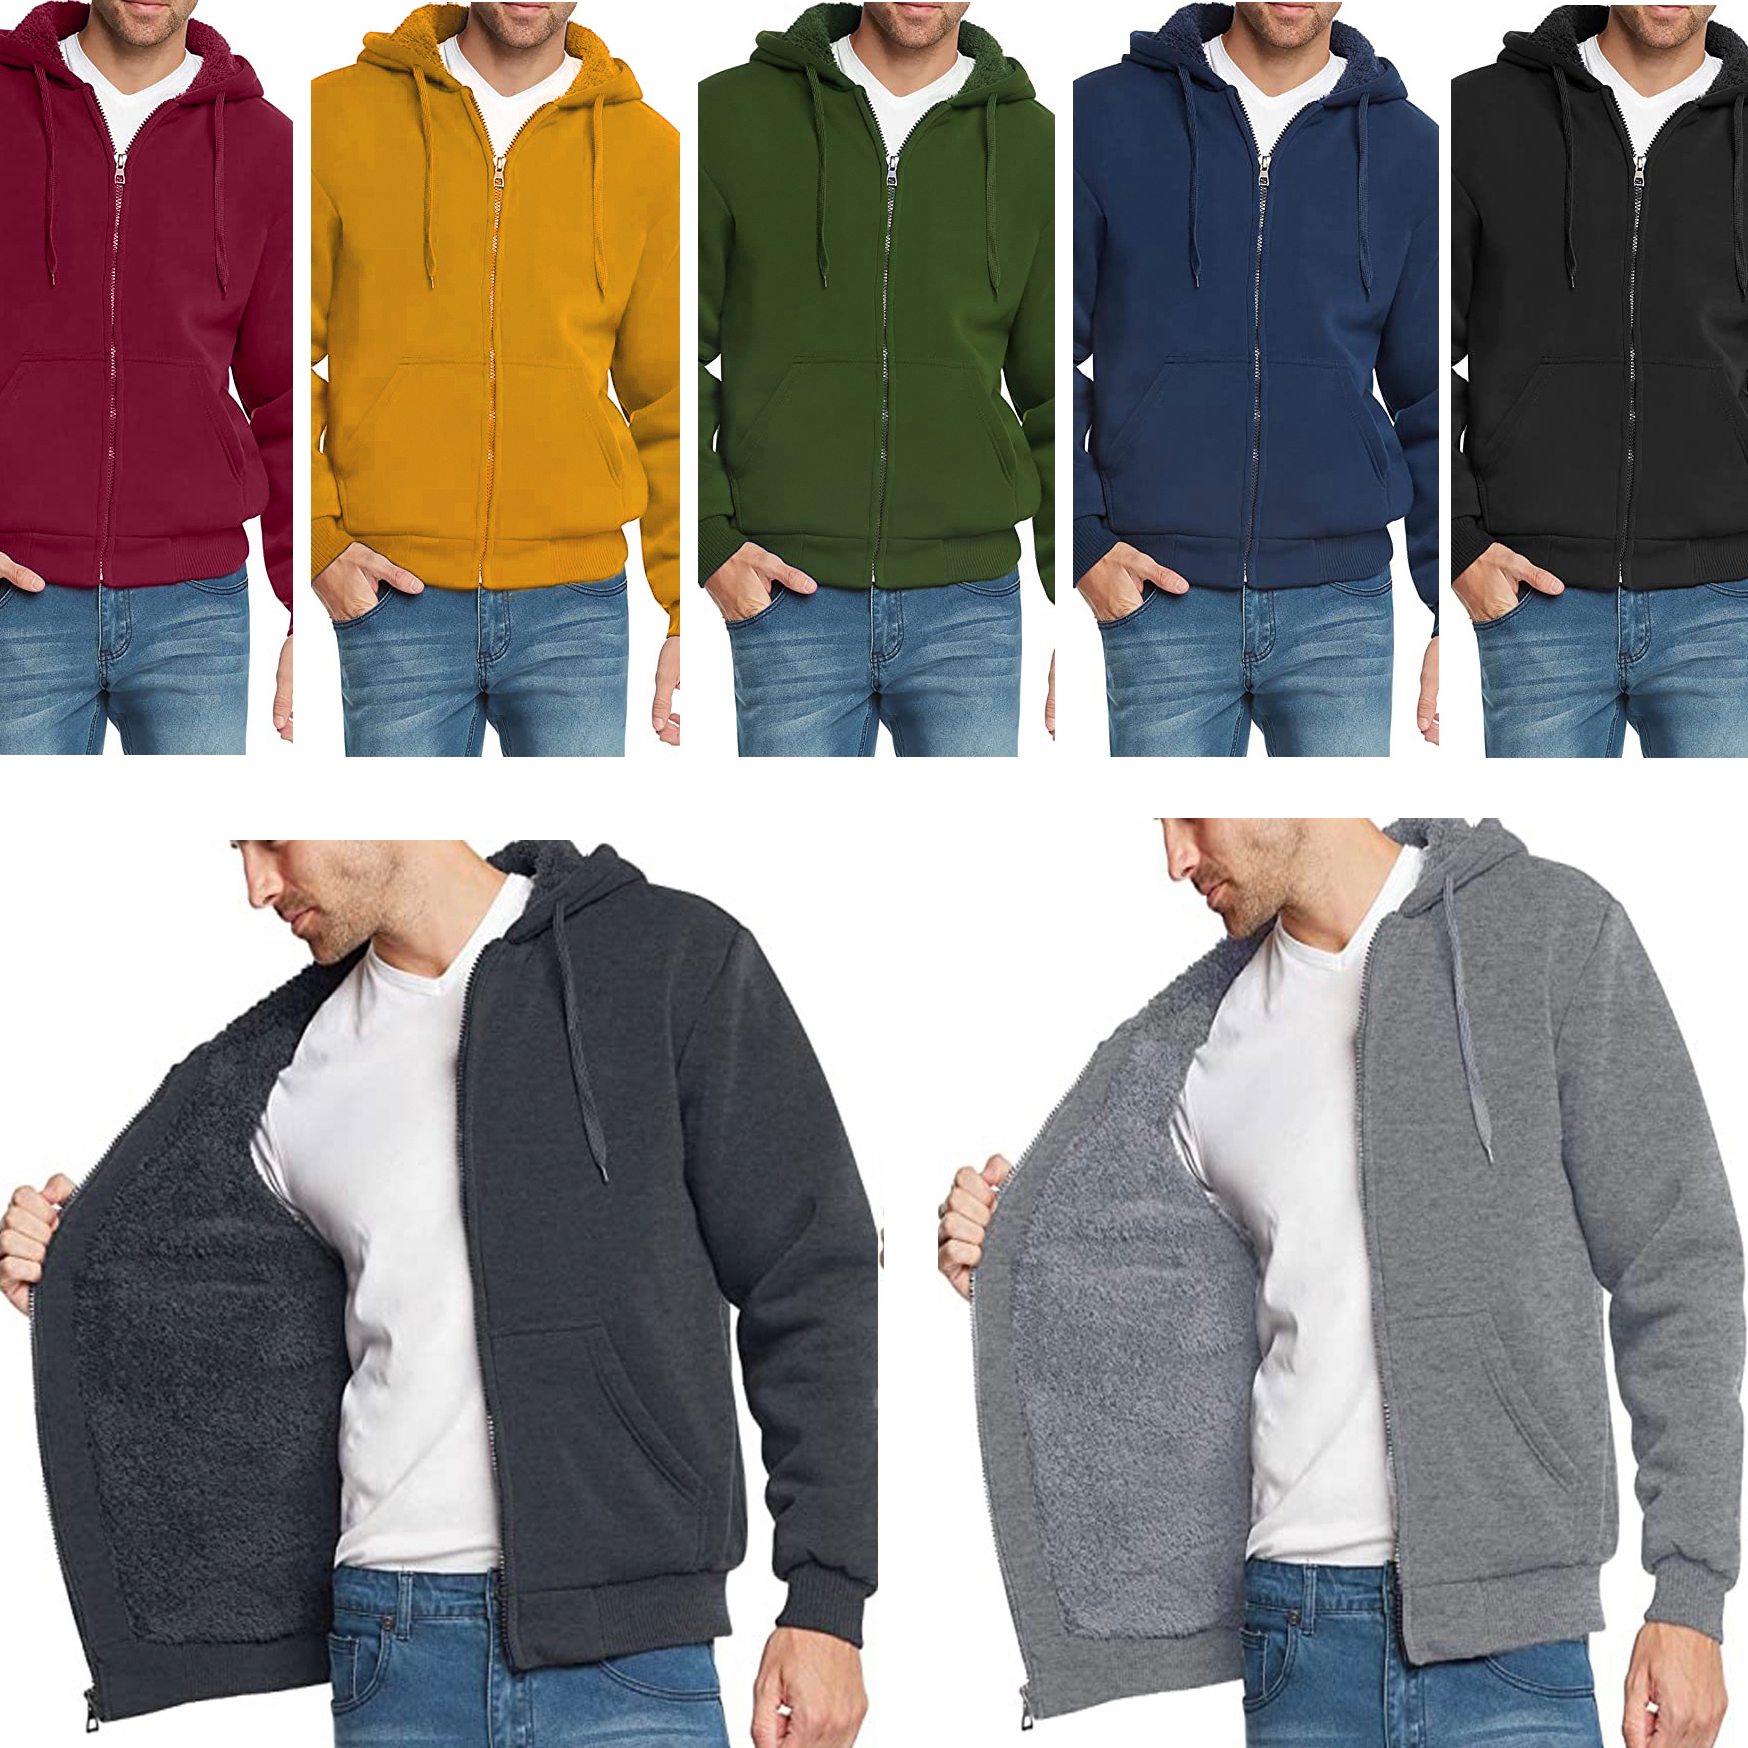 Men's Extra-Thick Sherpa Lined Fleece Hoodie (Big & Tall Sizes Available) - Charcoal, XX-Large